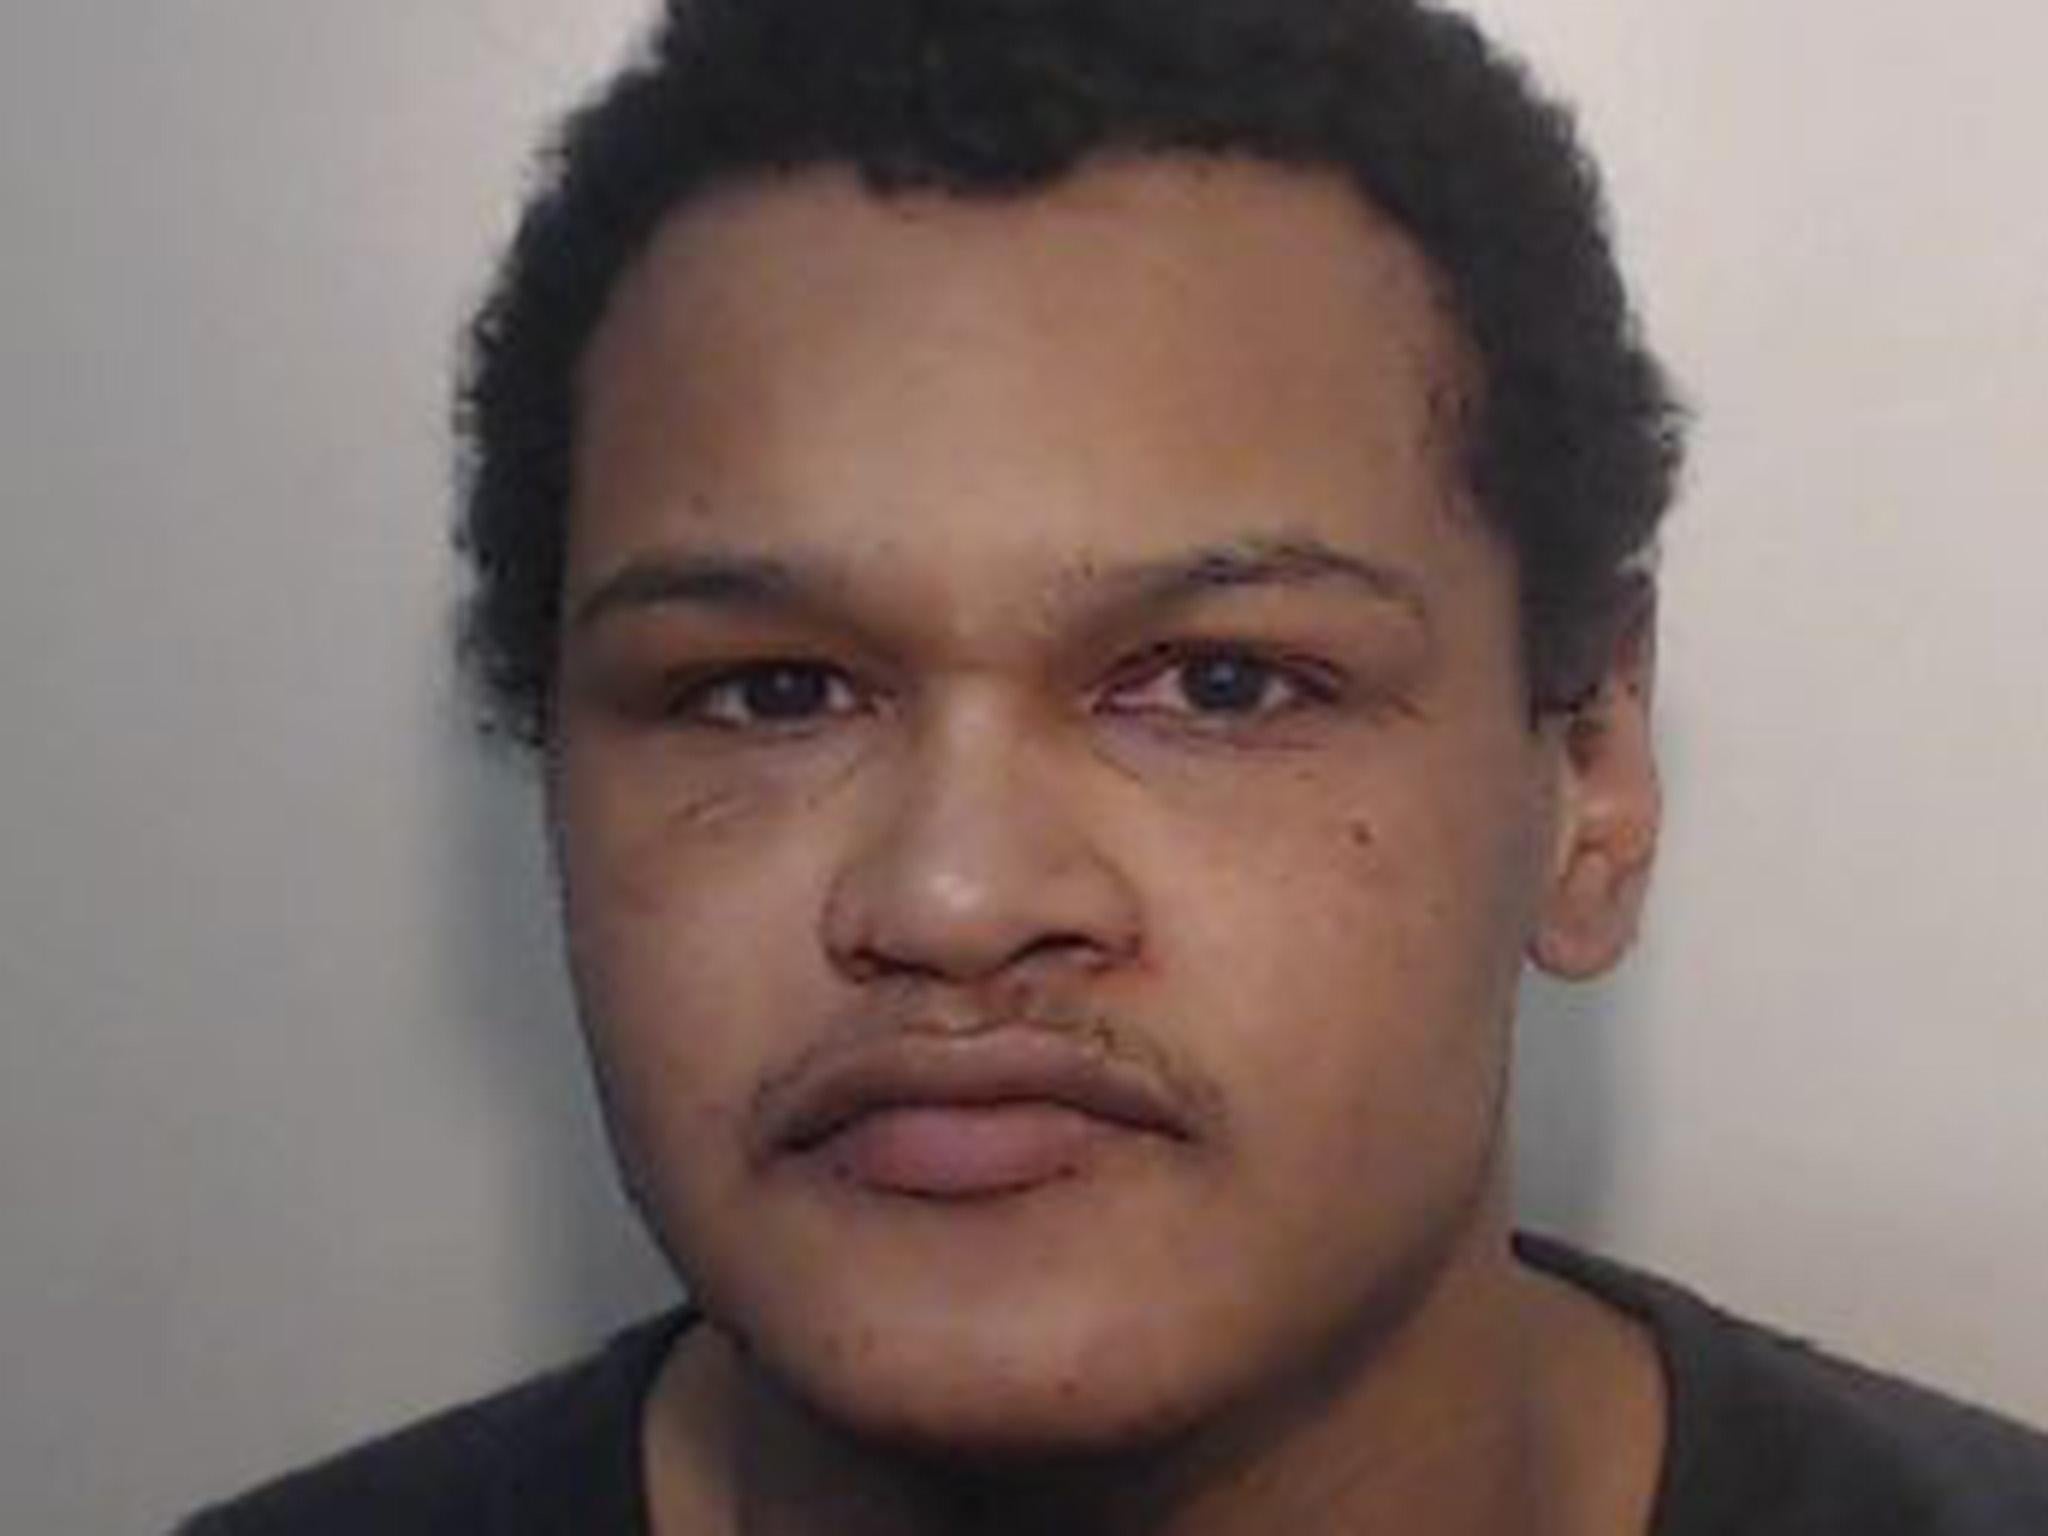 Genesis Beresford Edwards, who was sentenced to life with a minimum of 11 years for attempted murder and assault